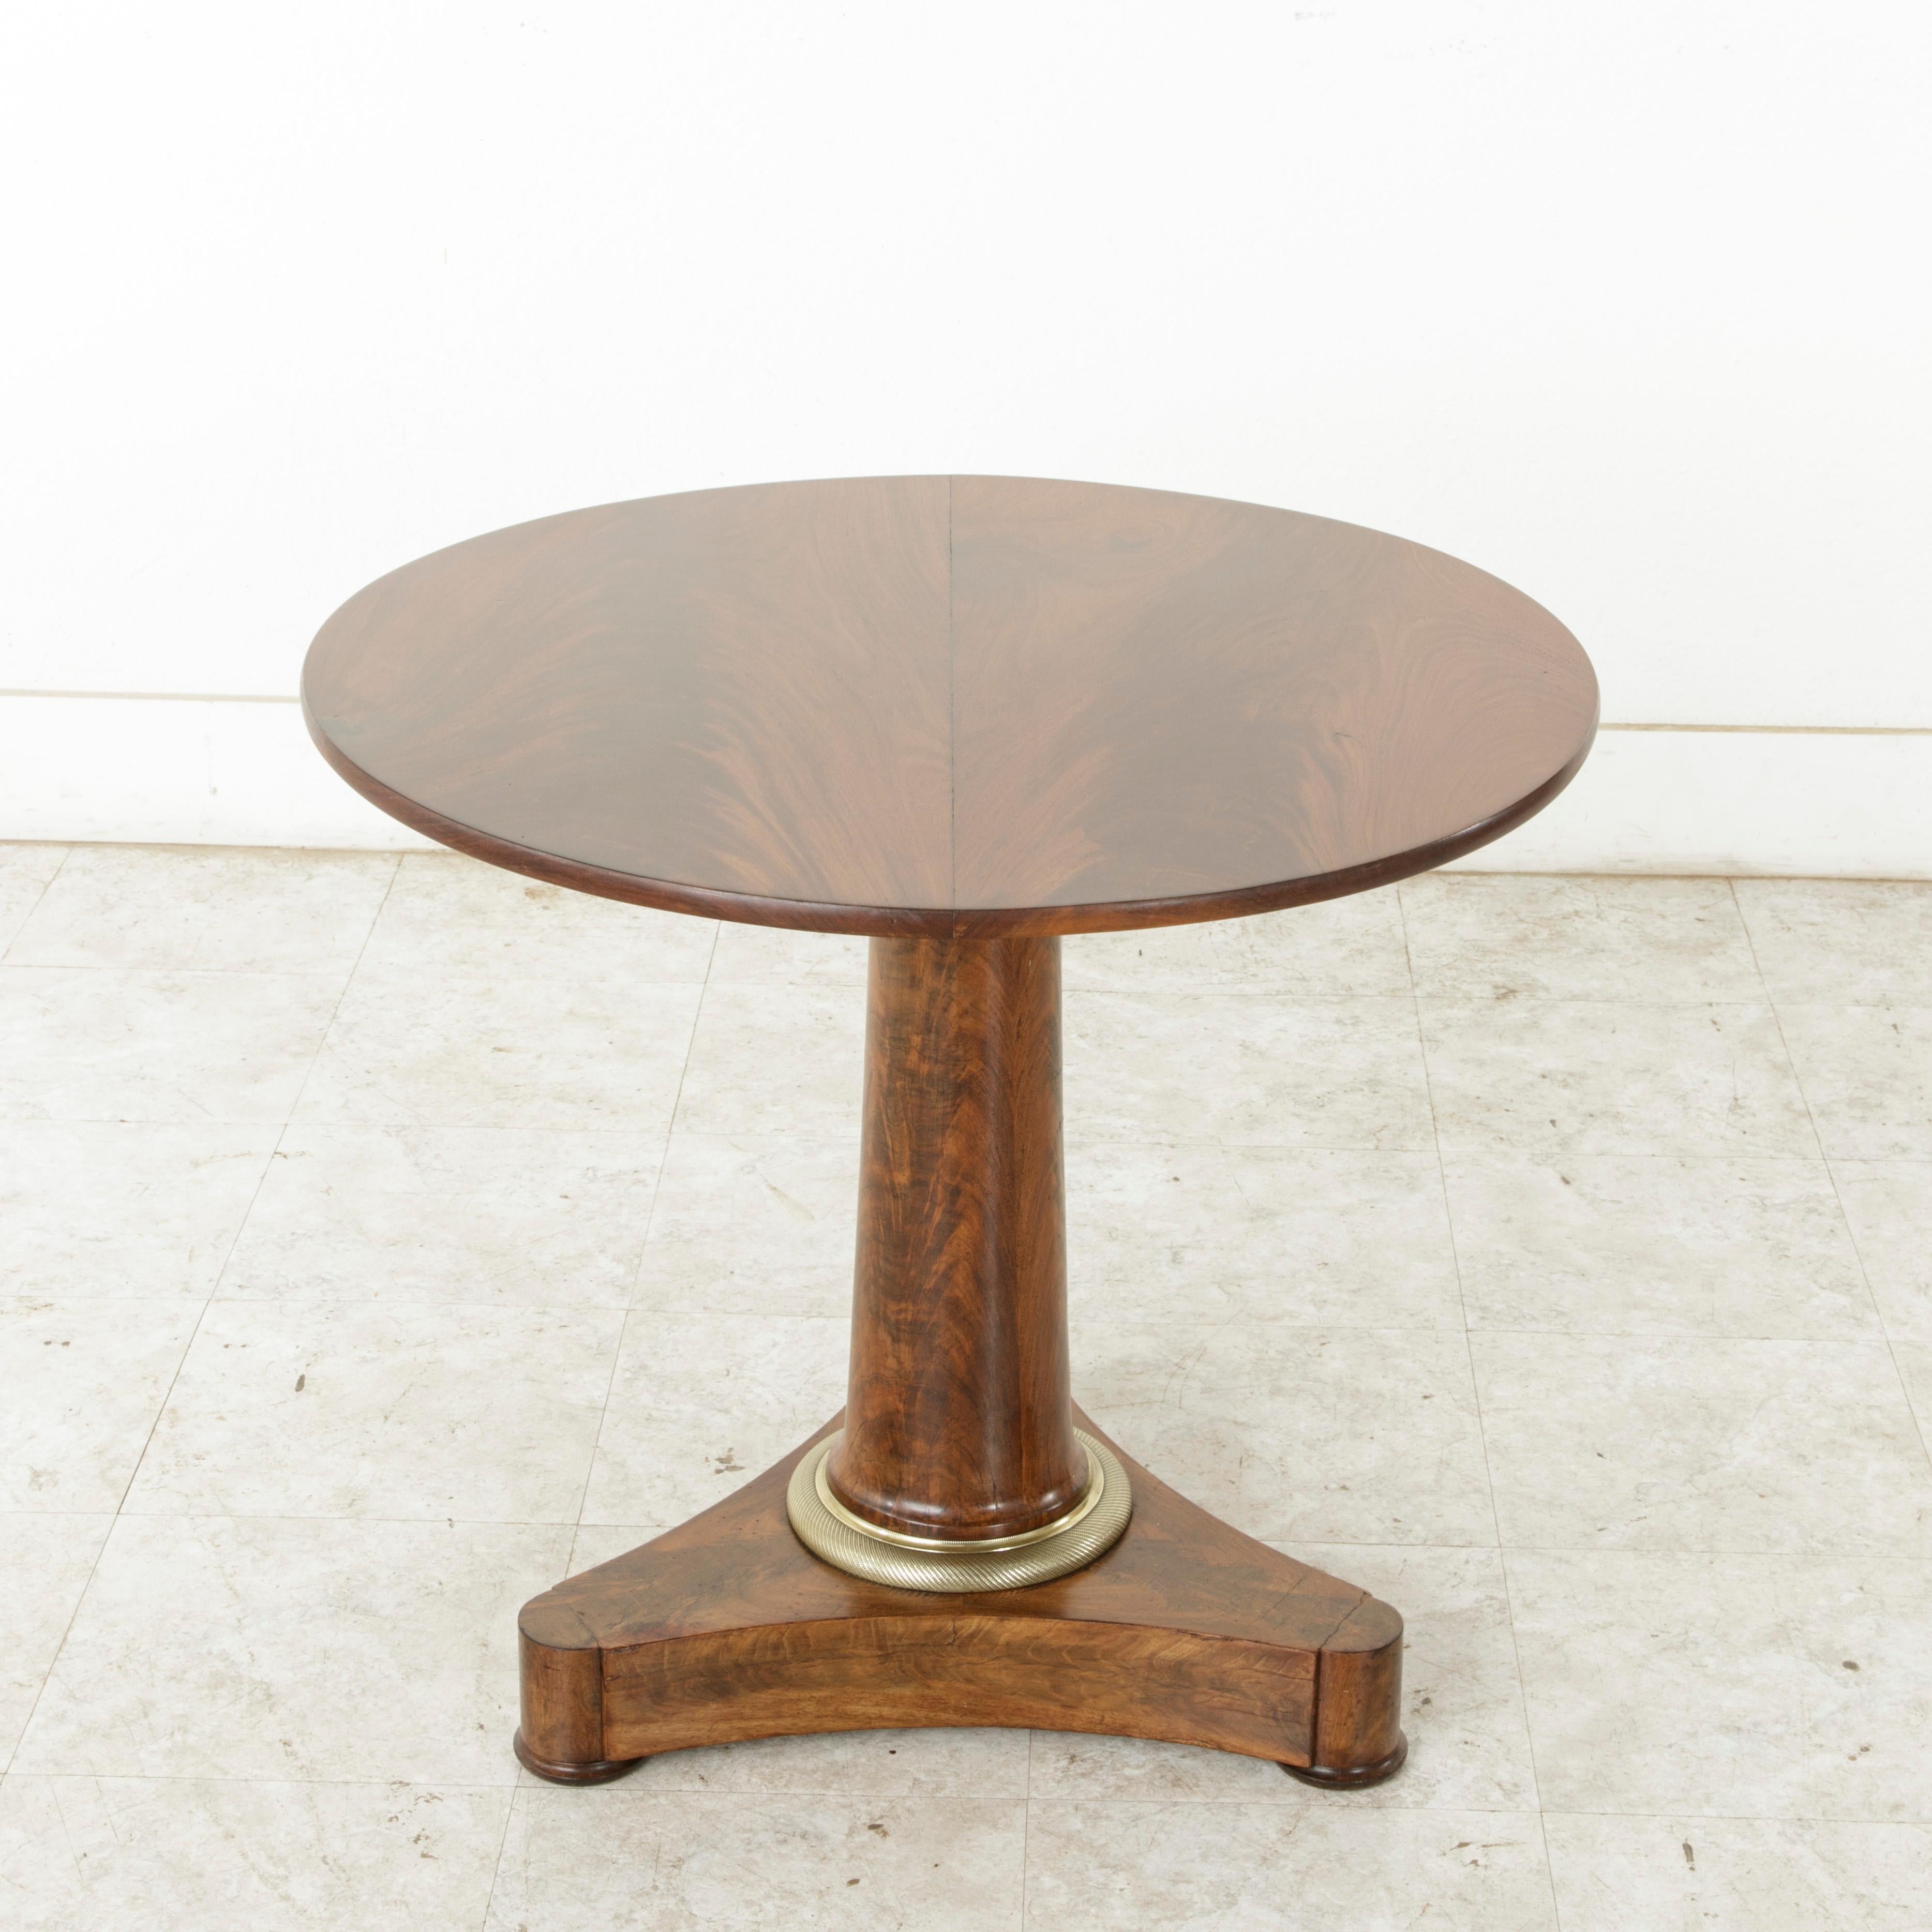 This 19th century French Empire period gueridon or pedestal table is constructed of solid mahogany. Its mahogany top is formed with two planks of wood resting on a central pillar. A chiseled bronze ring detailed with beading surrounds the bottom of